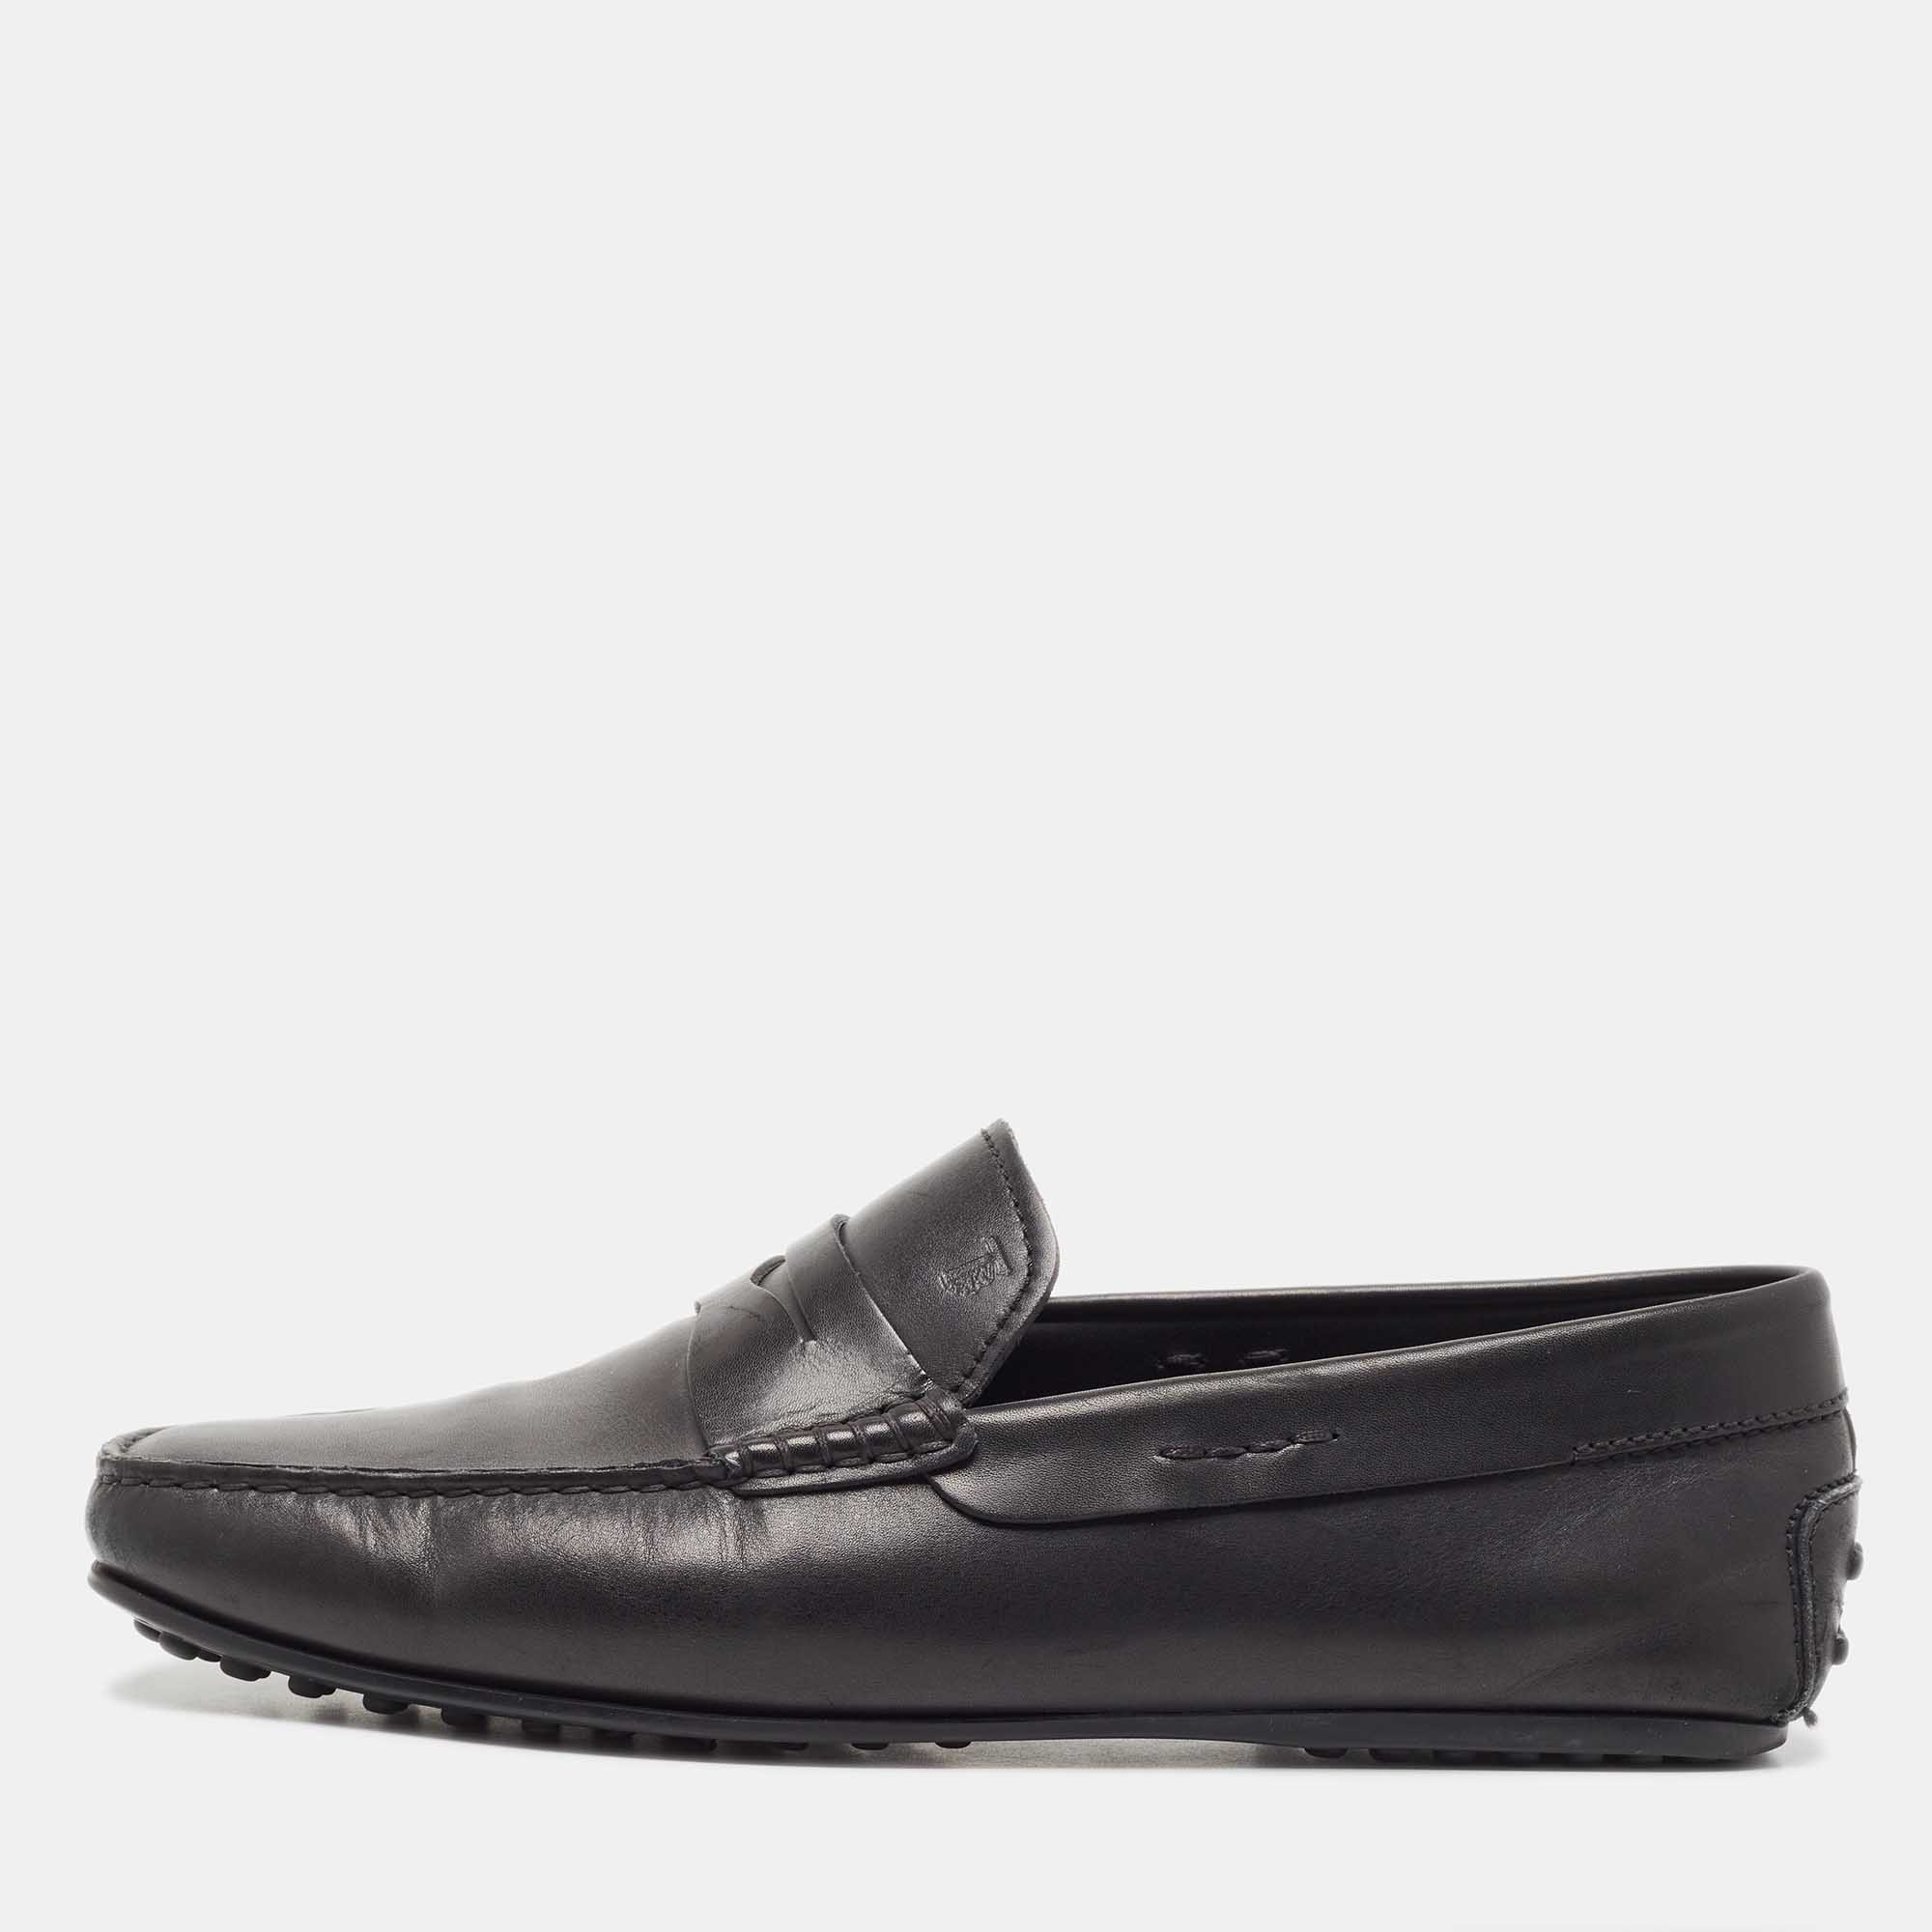 Tod's black leather penny loafers size 42